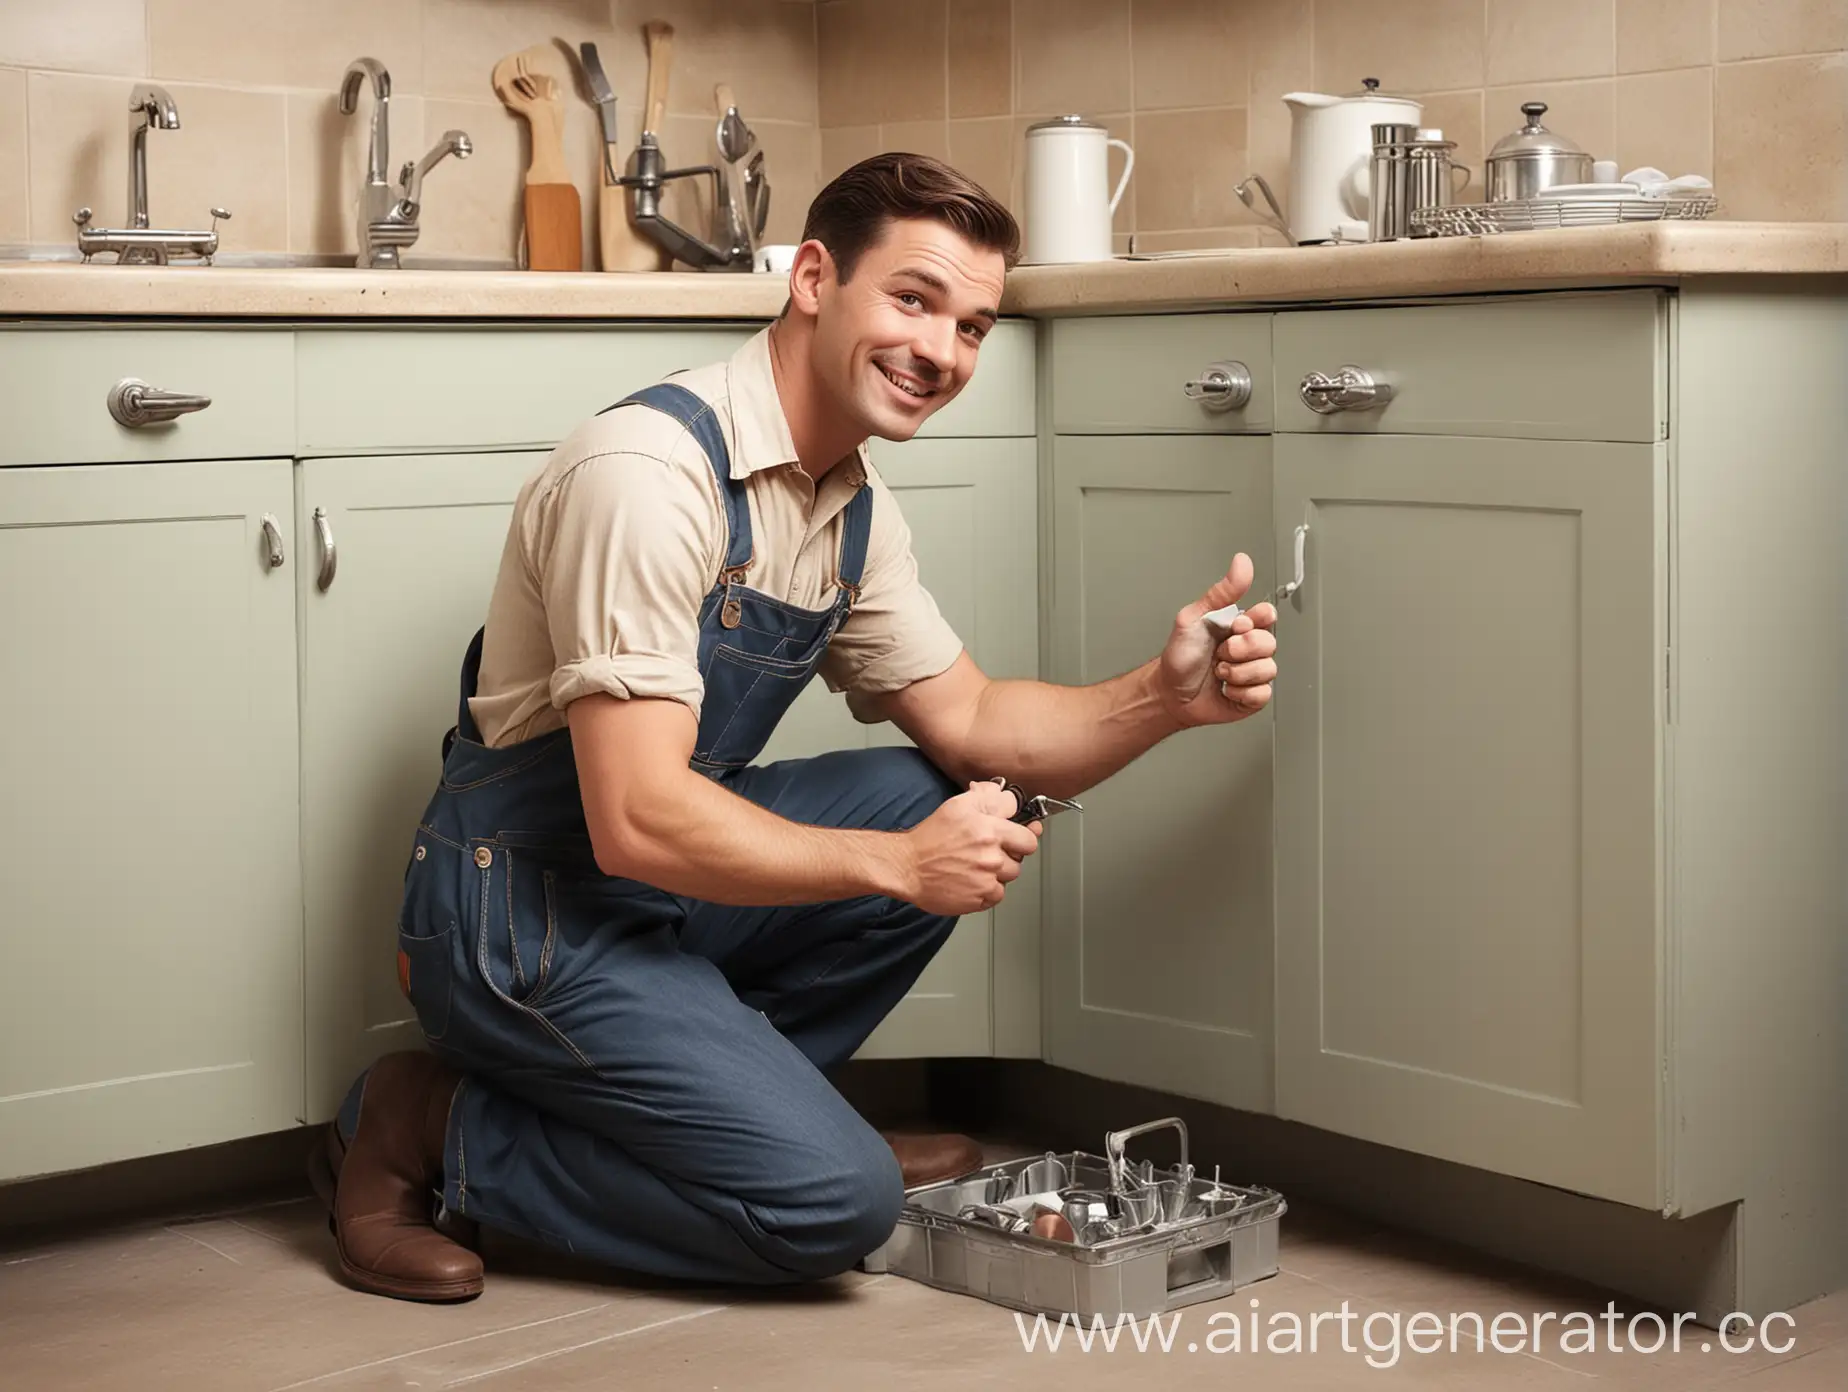 Cheerful-DisneyStyle-1930s-Repairman-Fixing-Dishwasher-with-Toolbox